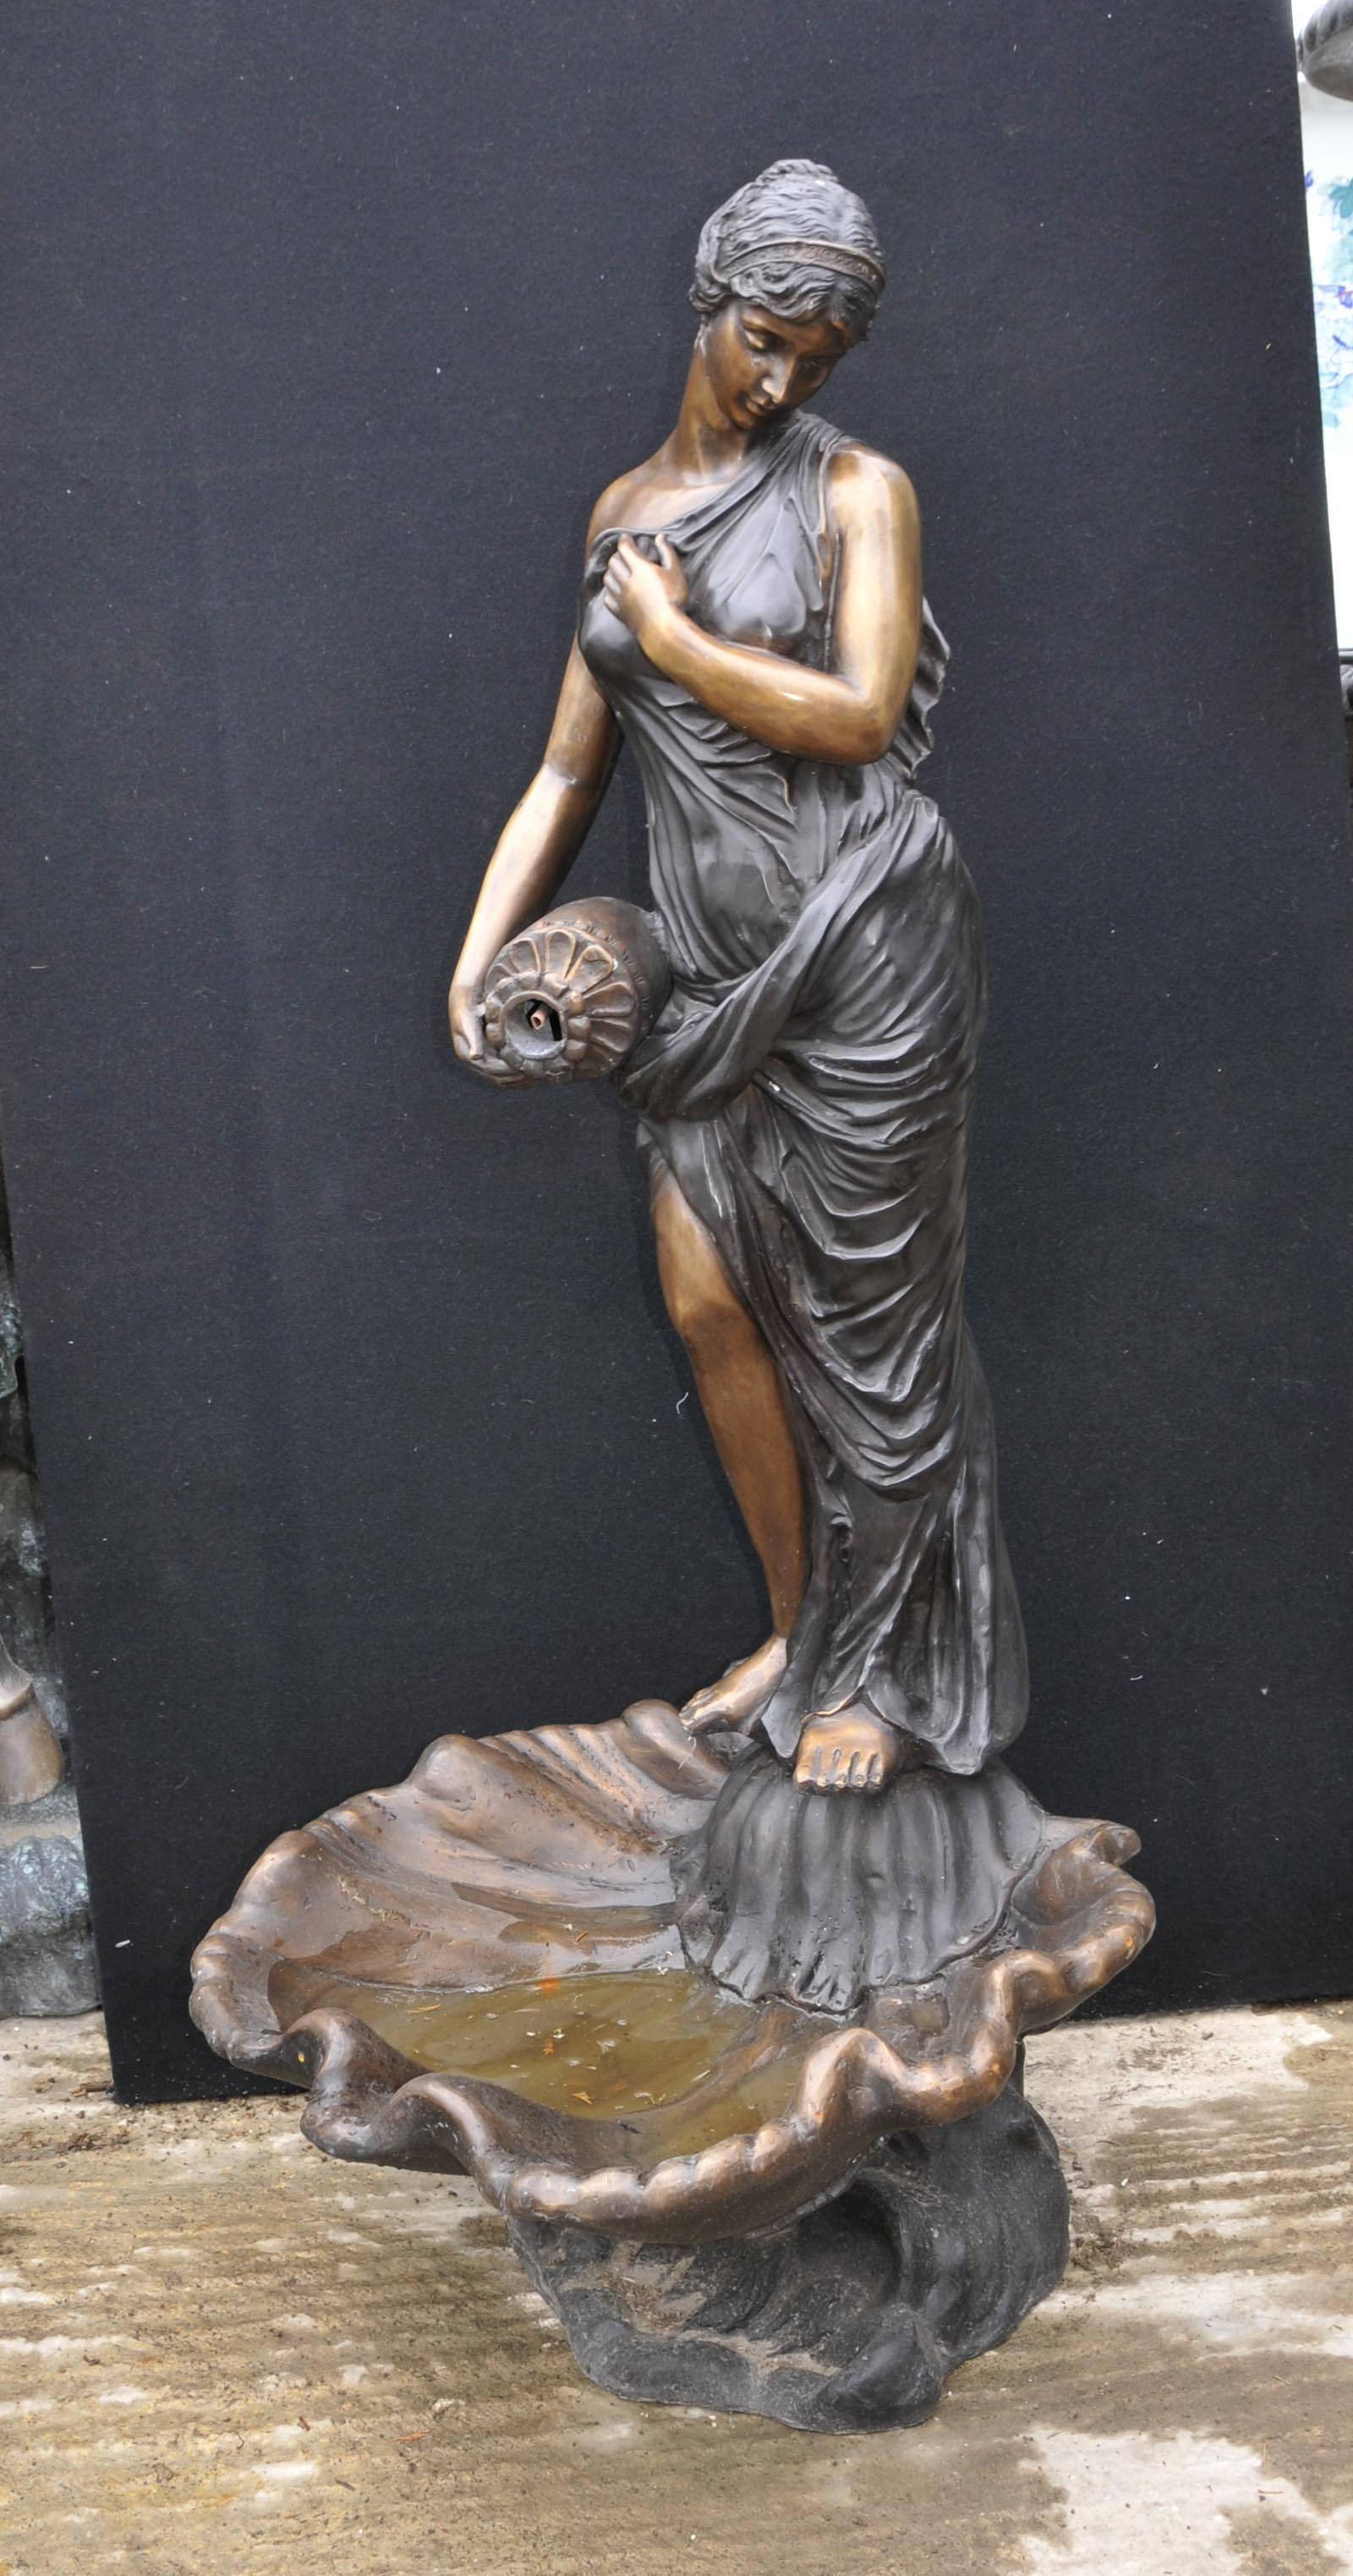 Gorgeous lifesize Italian bronze casting of a maiden holding an Amphora urn as fountain.
Water spills into the large conch shell at the bottom.
At over 5 feet tall great size to this piece which is of an architectural importance.
Patina to the